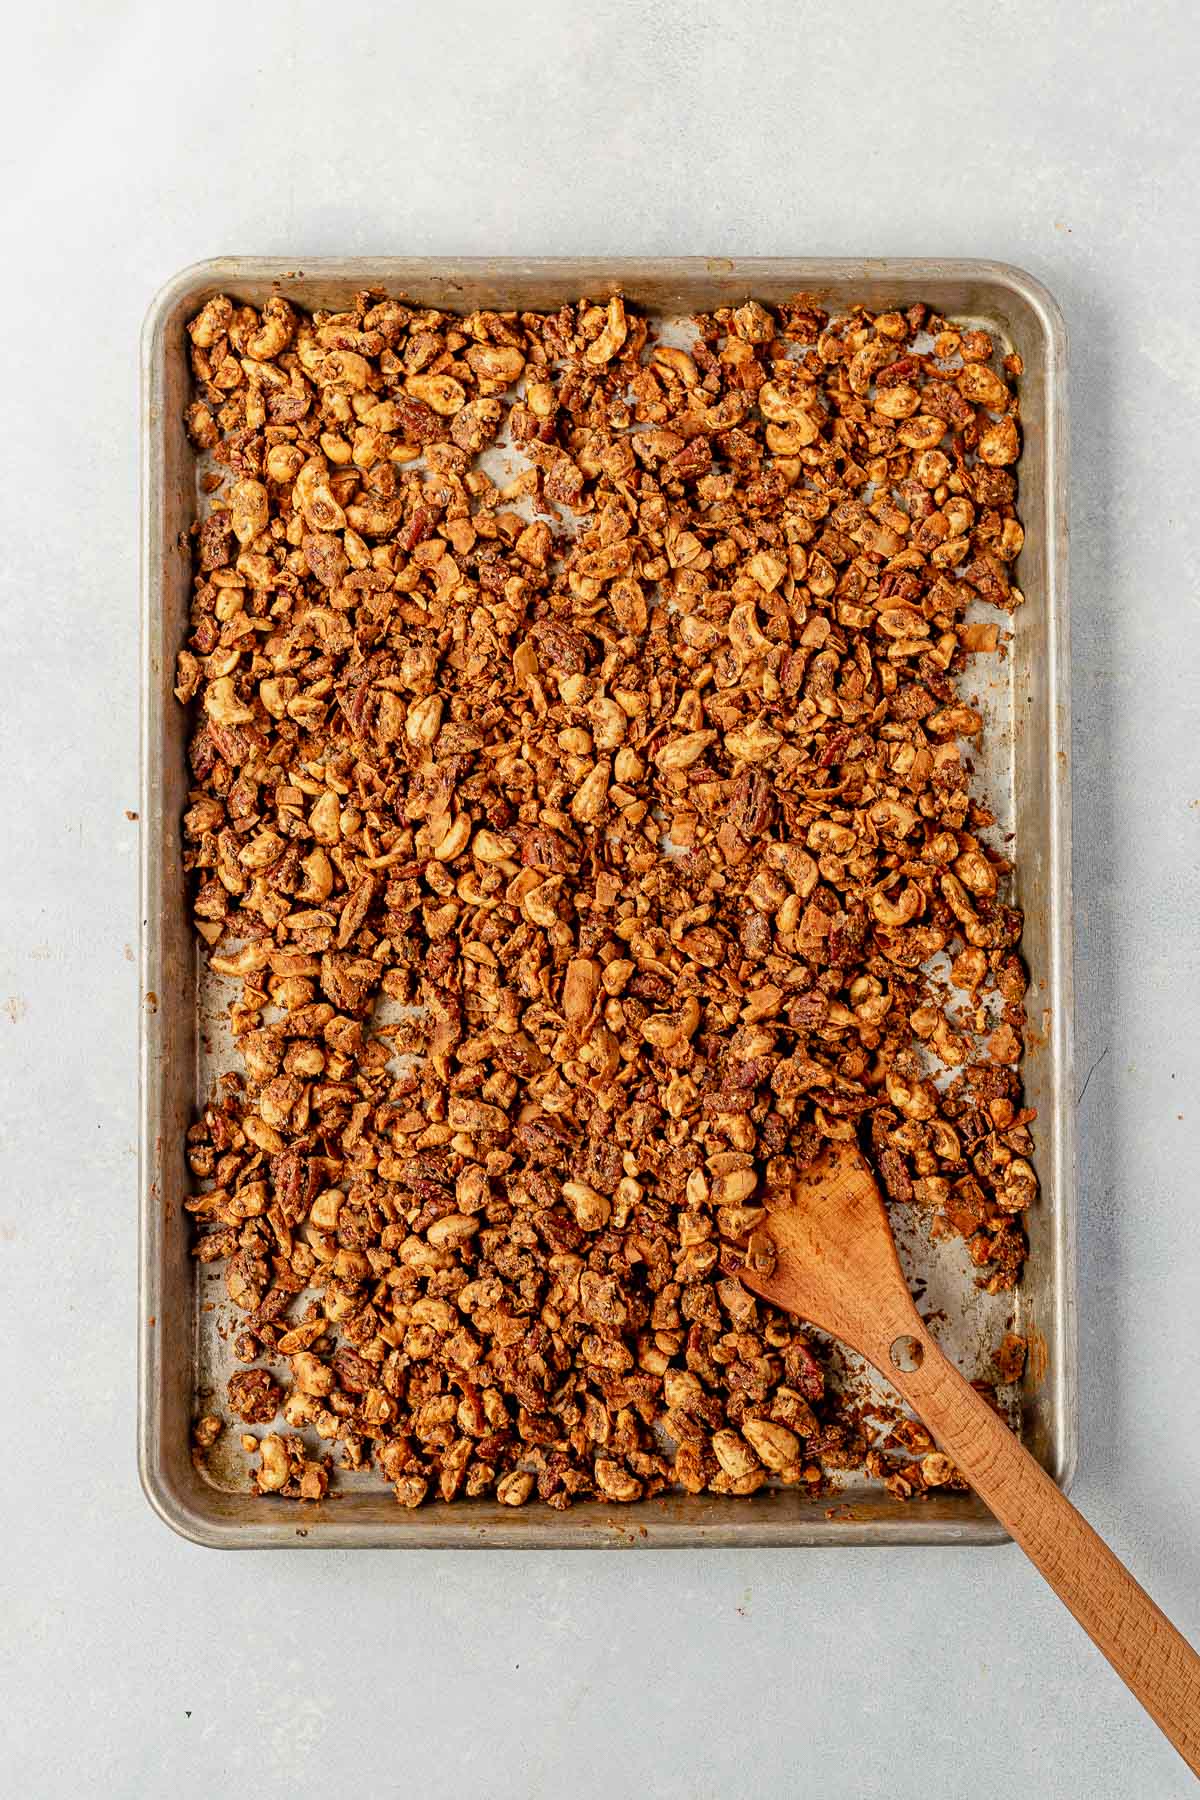 grain free granola spread out on a large sheet pan with a wooden spoon